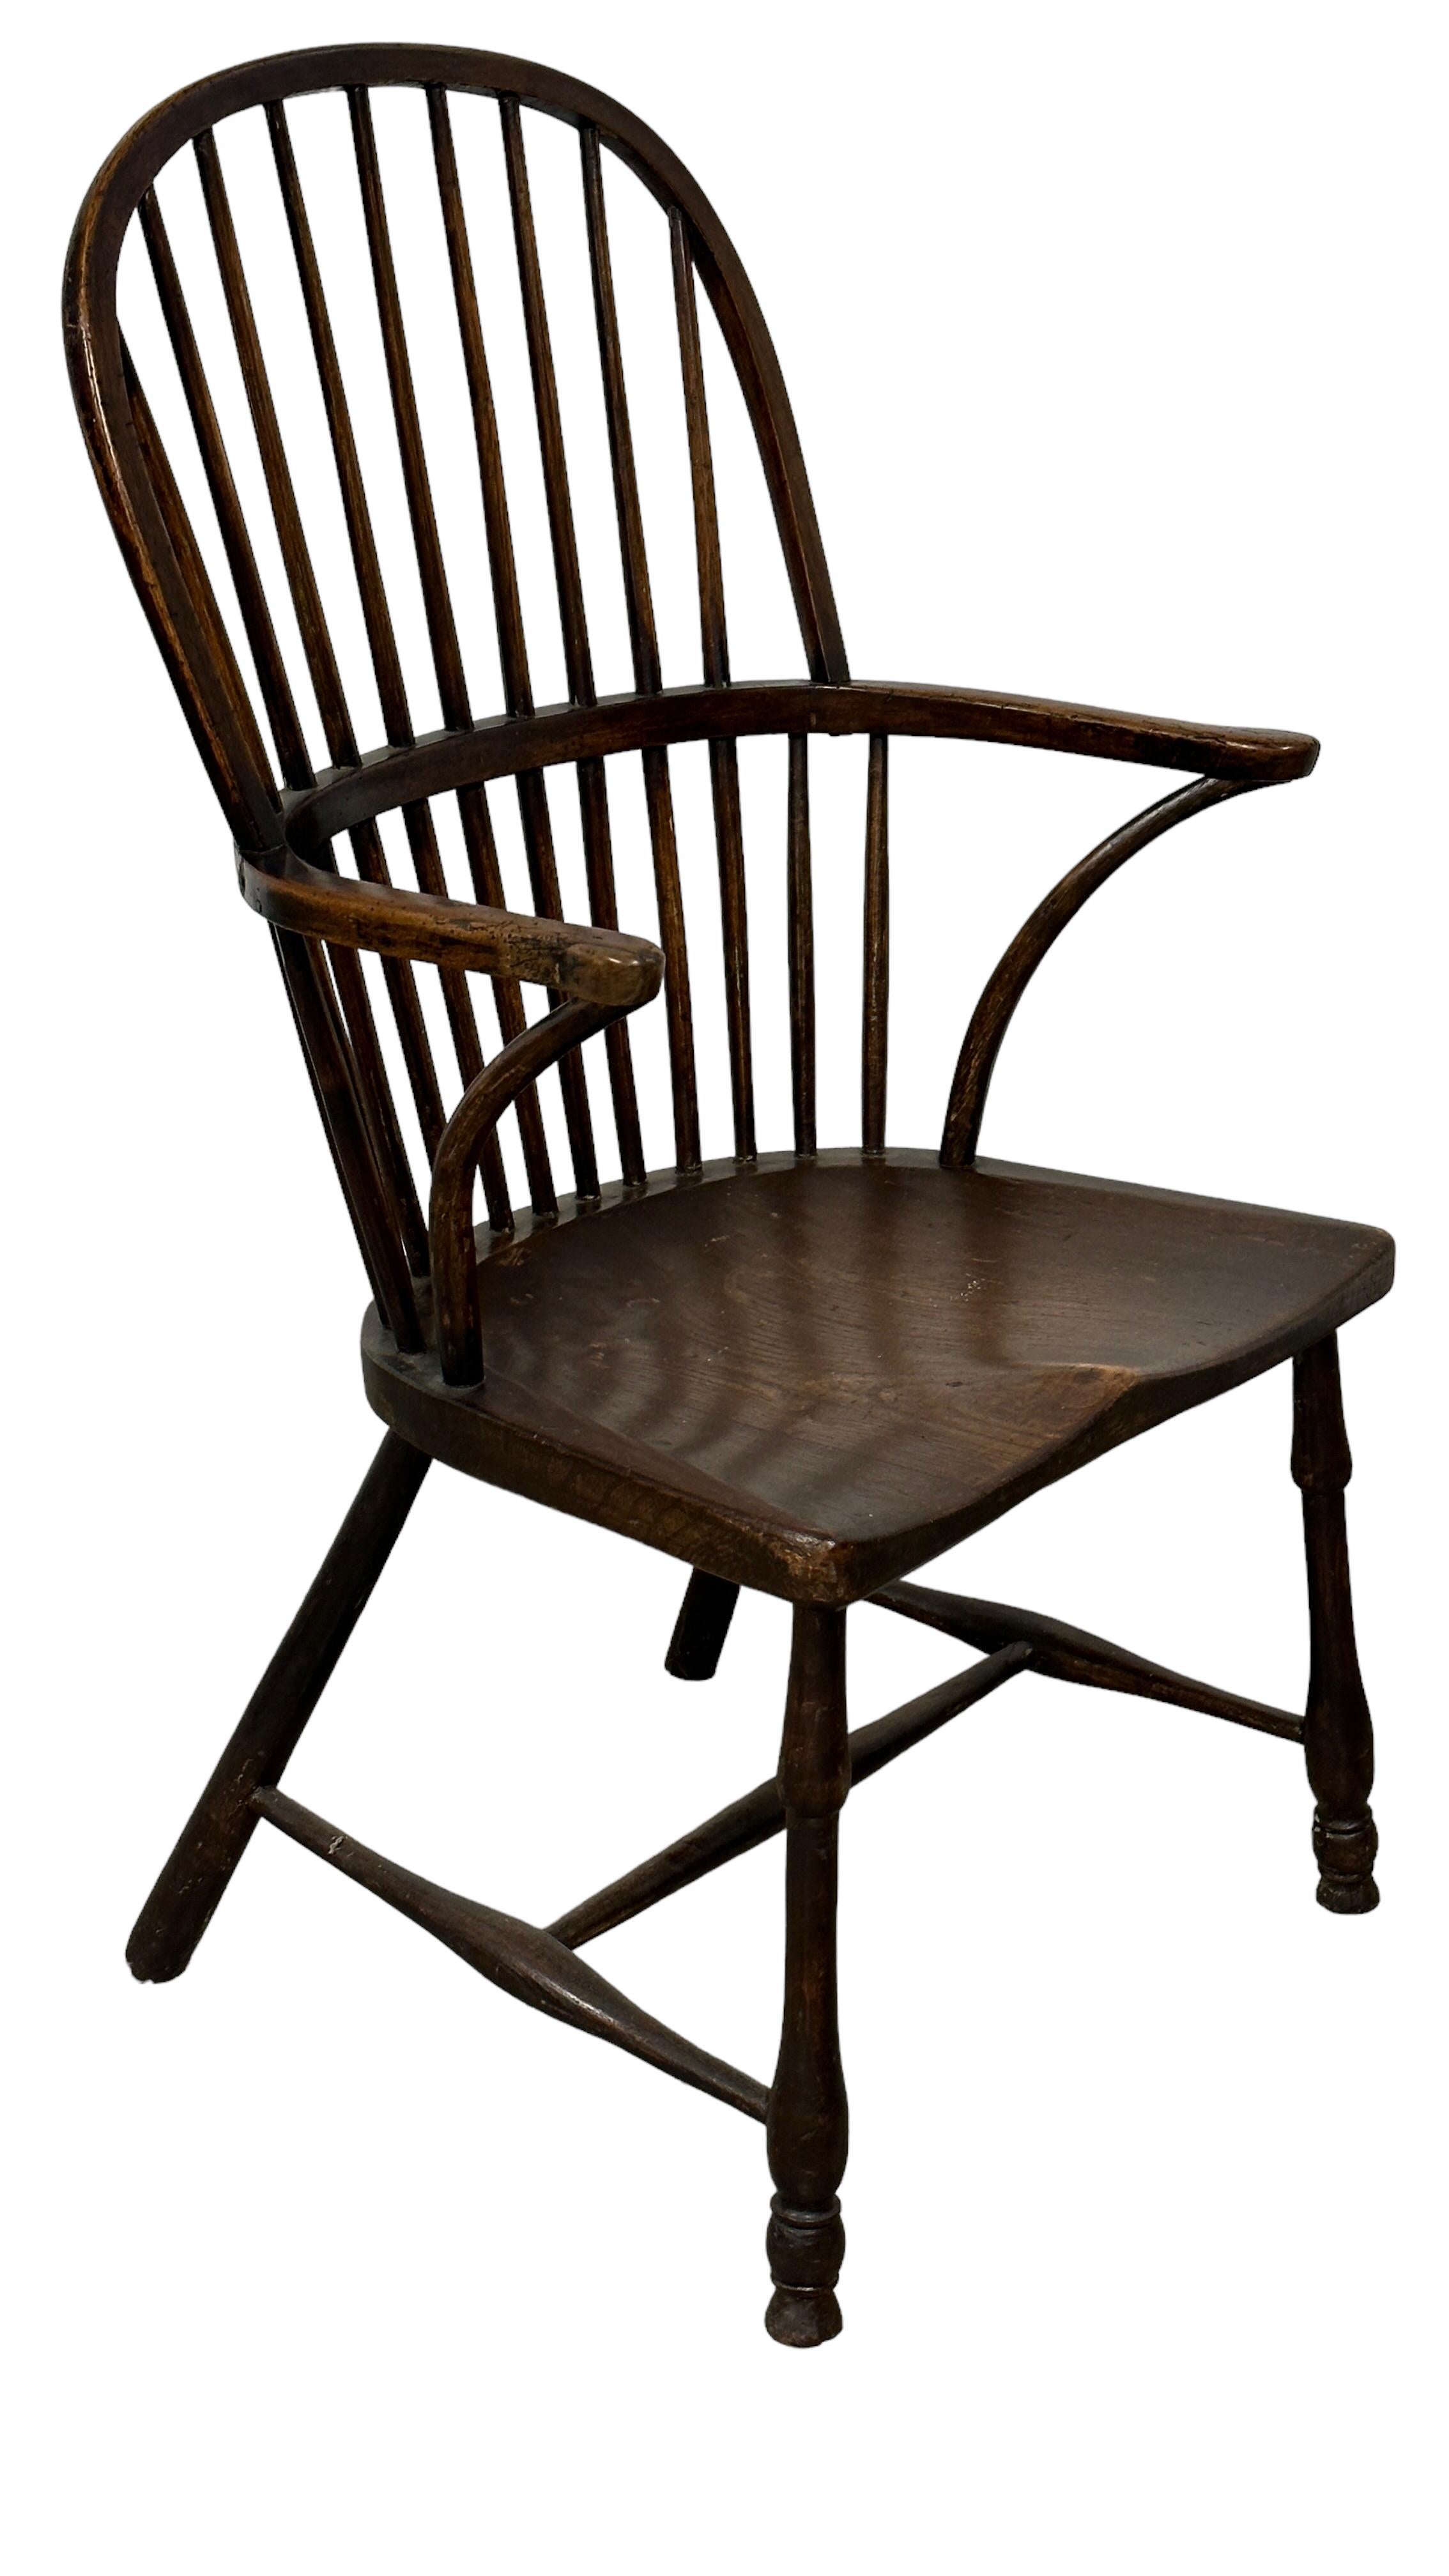 Beautiful Antique Windsor Wooden Chair, 19th Century, England 6